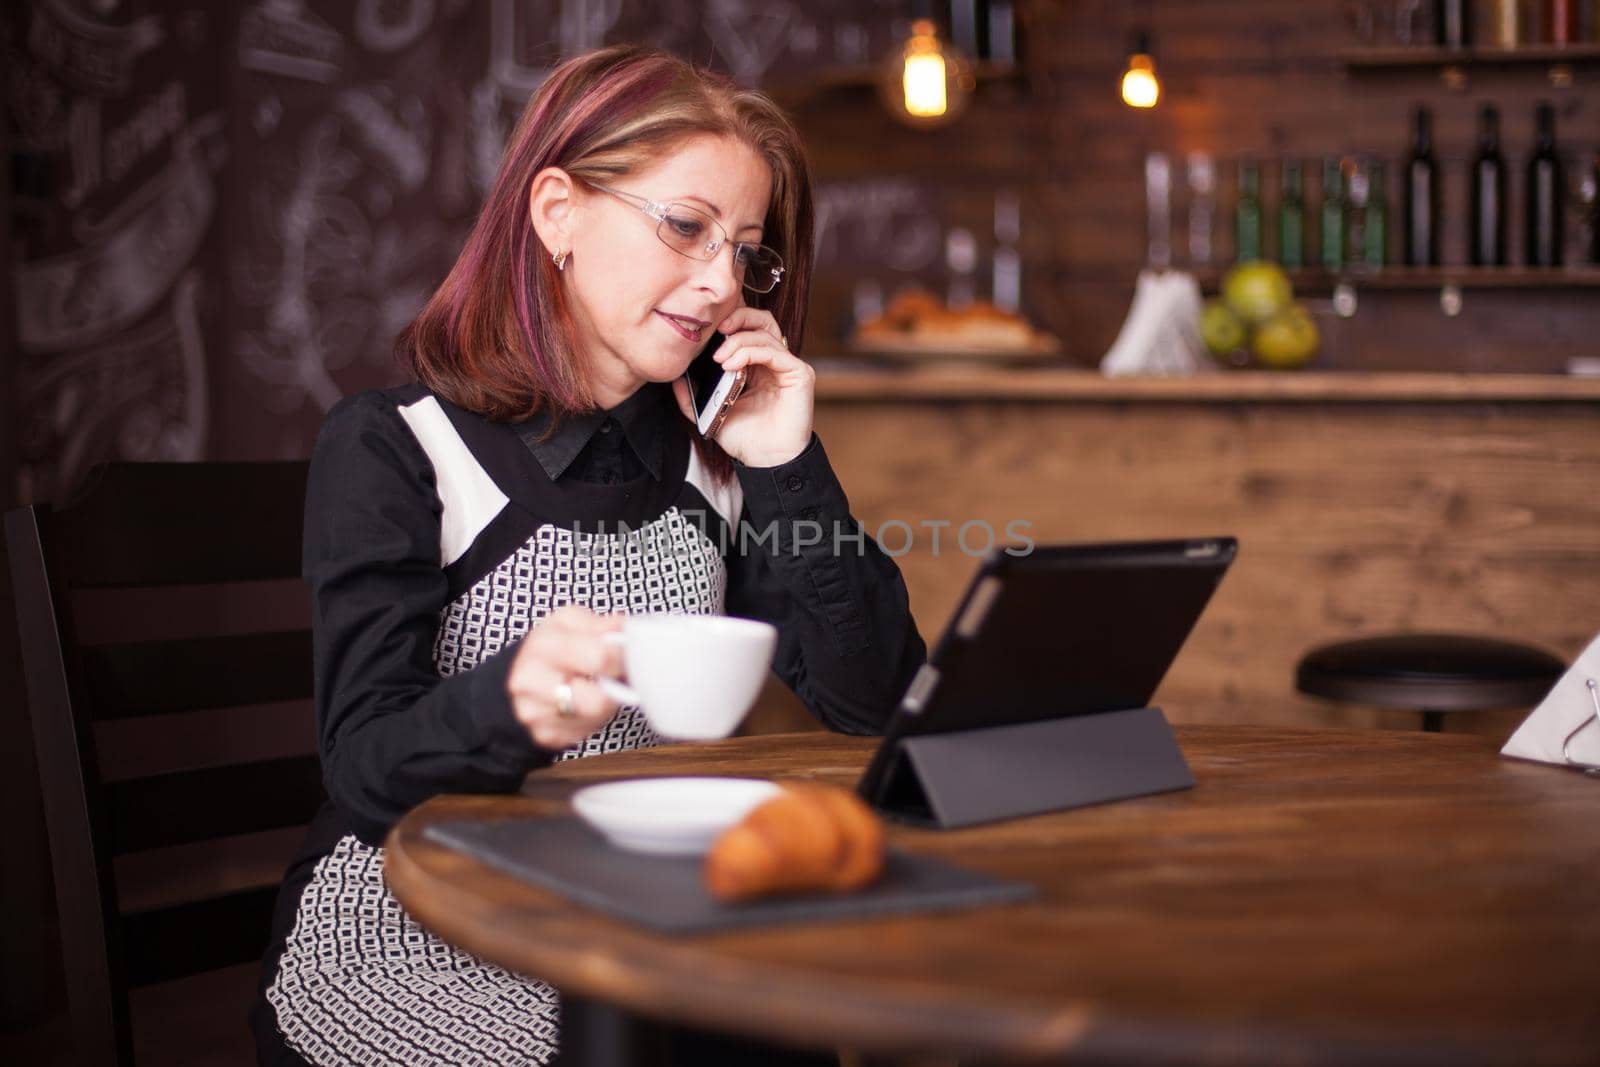 Successful adult businesswoman talking on her phone while holding a cup of coffee. Vintage restaurant